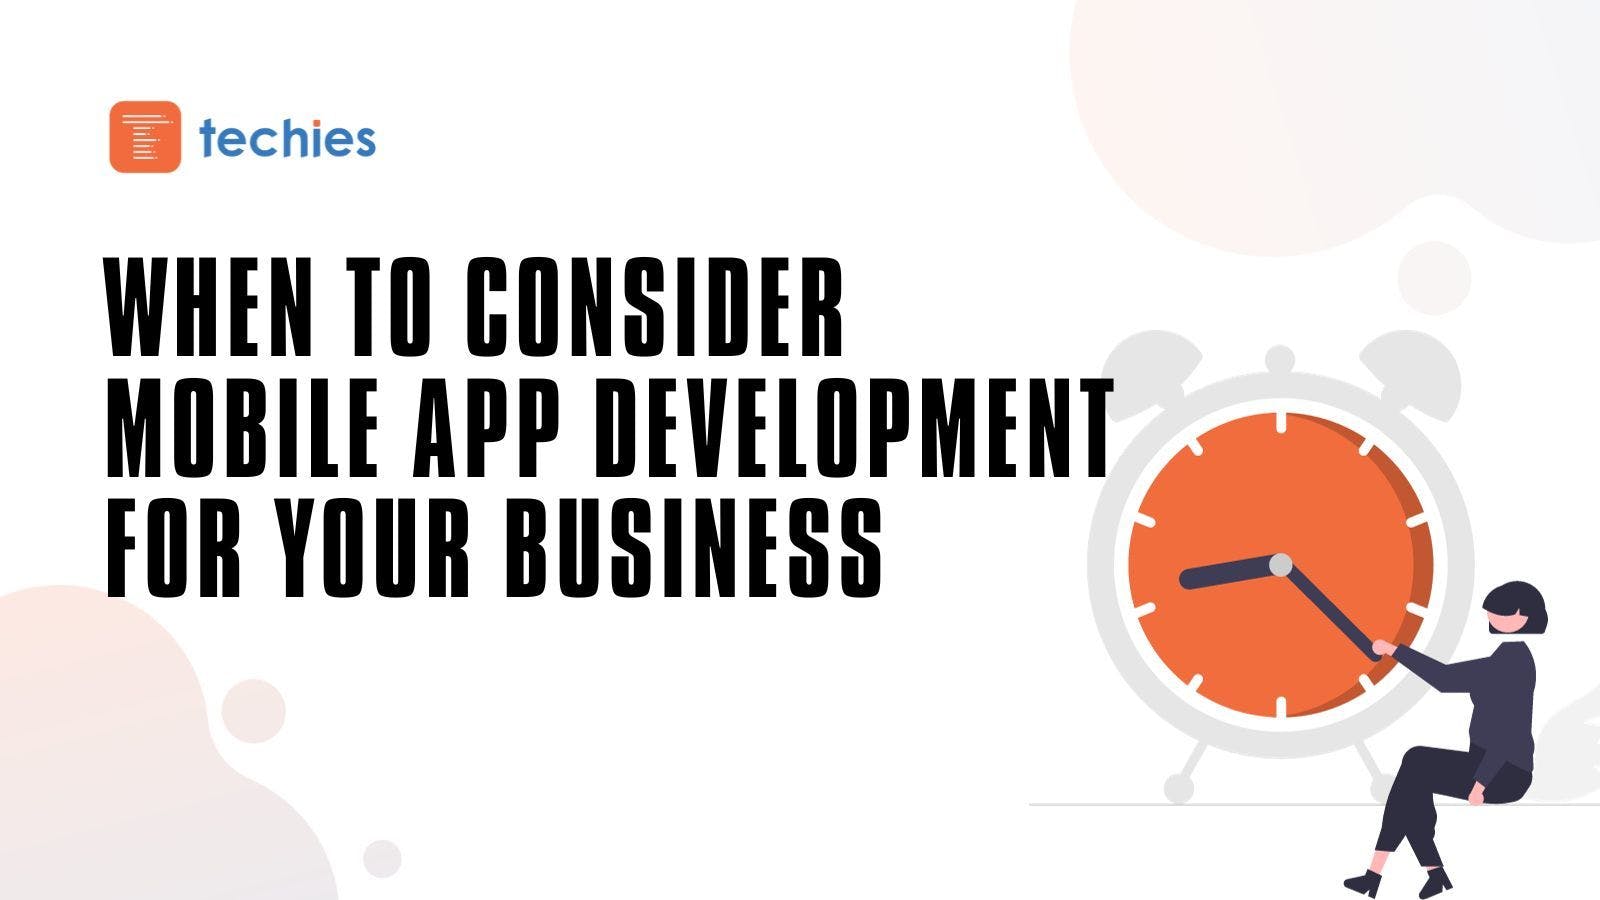 The Right Time: When to Consider Mobile App Development for Your Business